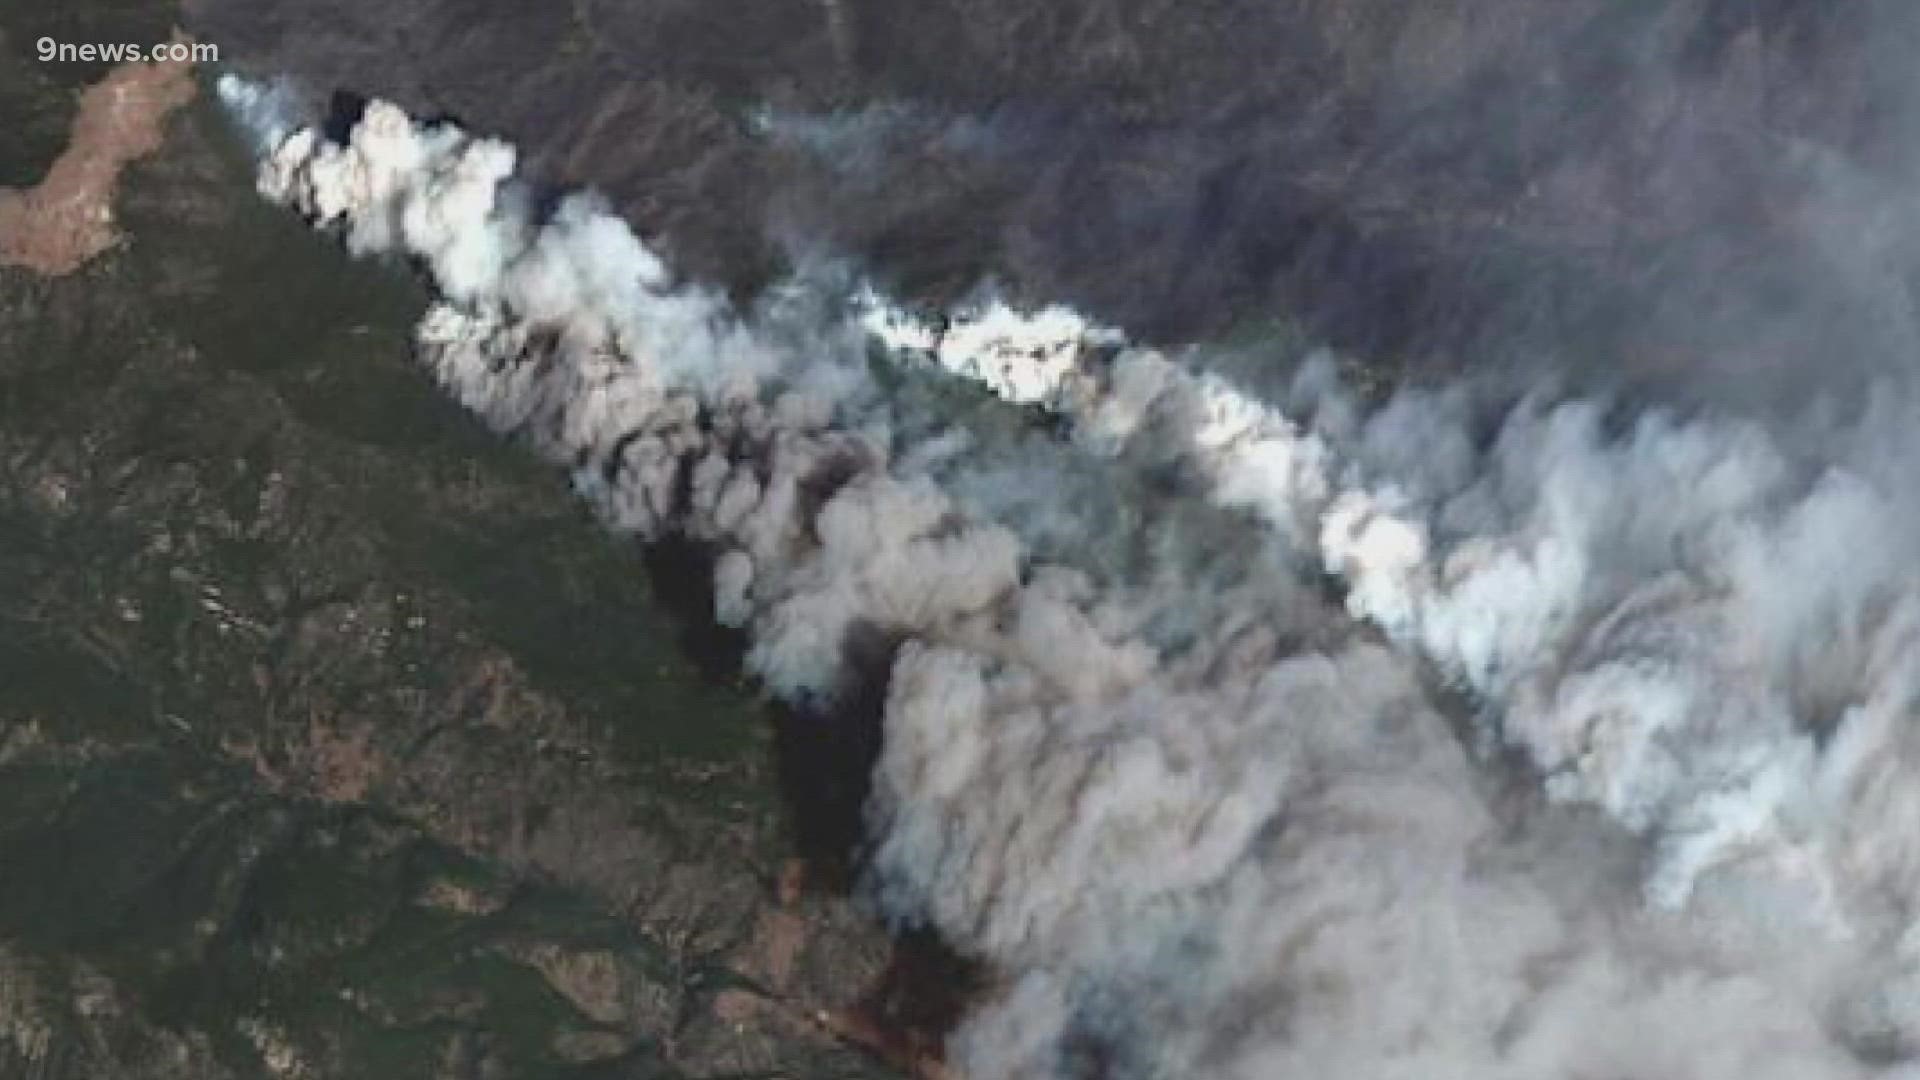 The satellites give fire crews a heads up on shifting flames and problem areas.